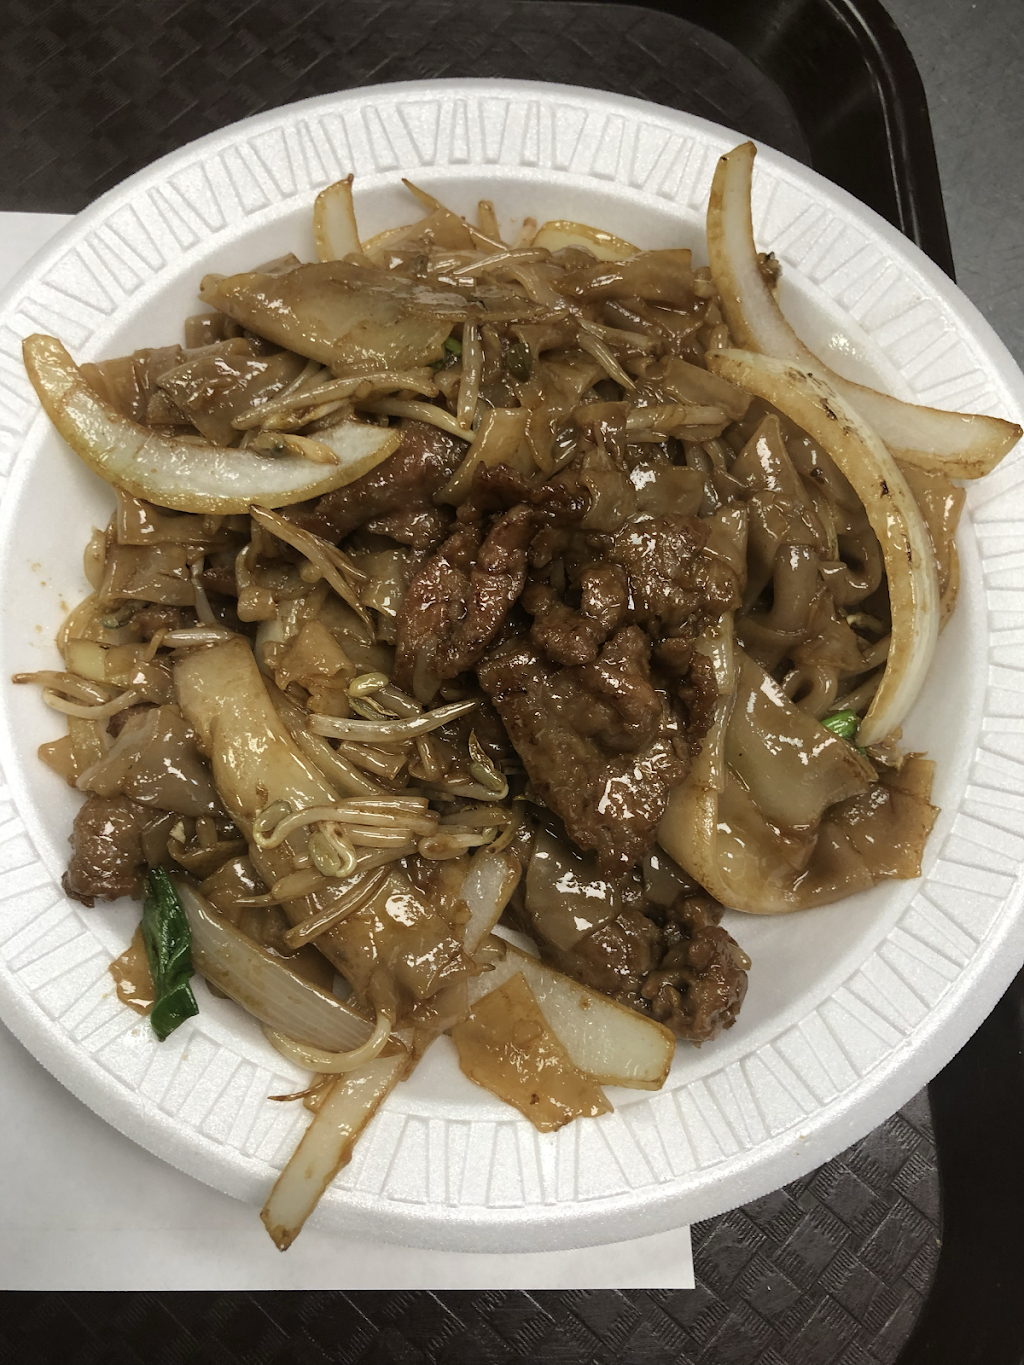 King II Wok | meal delivery | 1014 B Maple Ave, Glen Rock, NJ 07452, USA | 2016128586 OR +1 201-612-8586